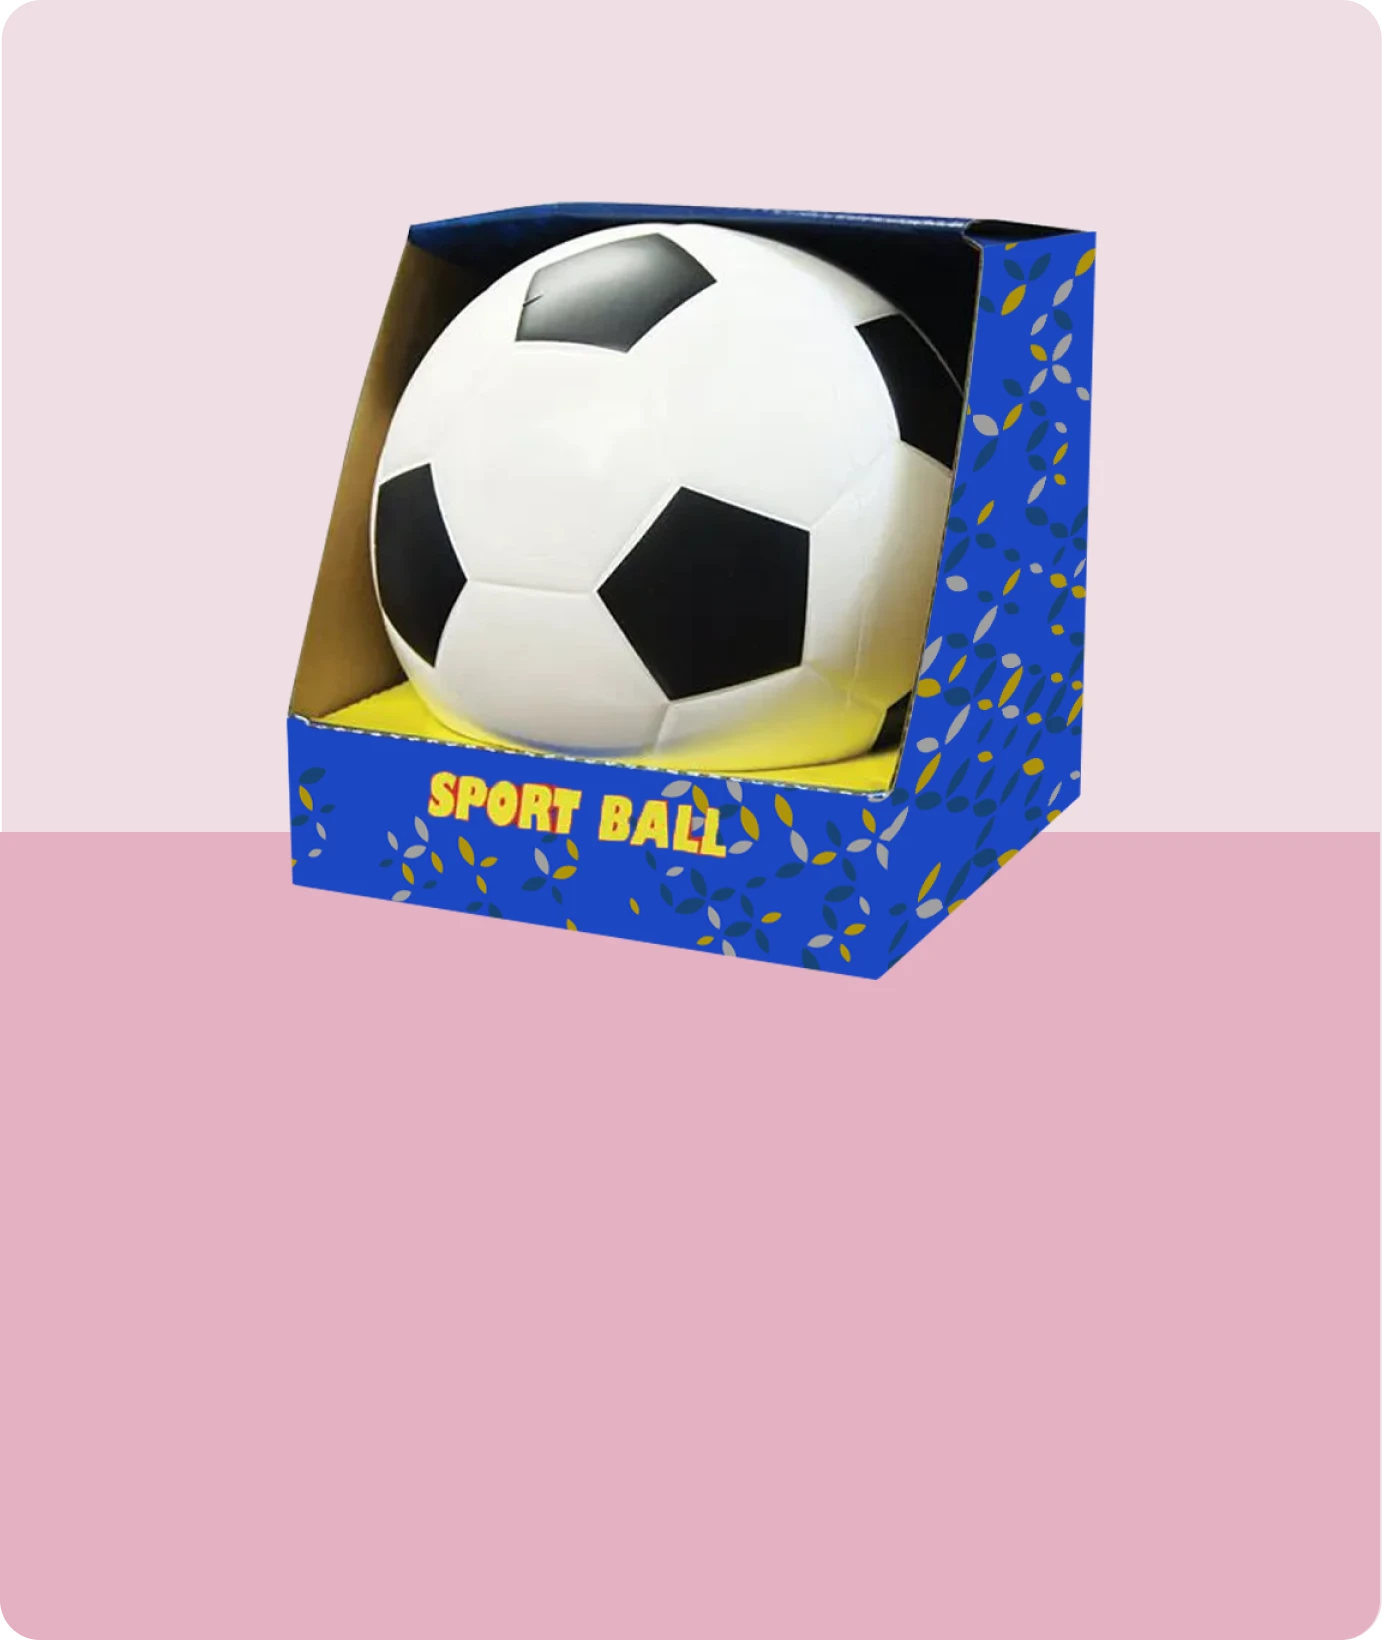 Custom Football Boxes related products image | The Box Lane